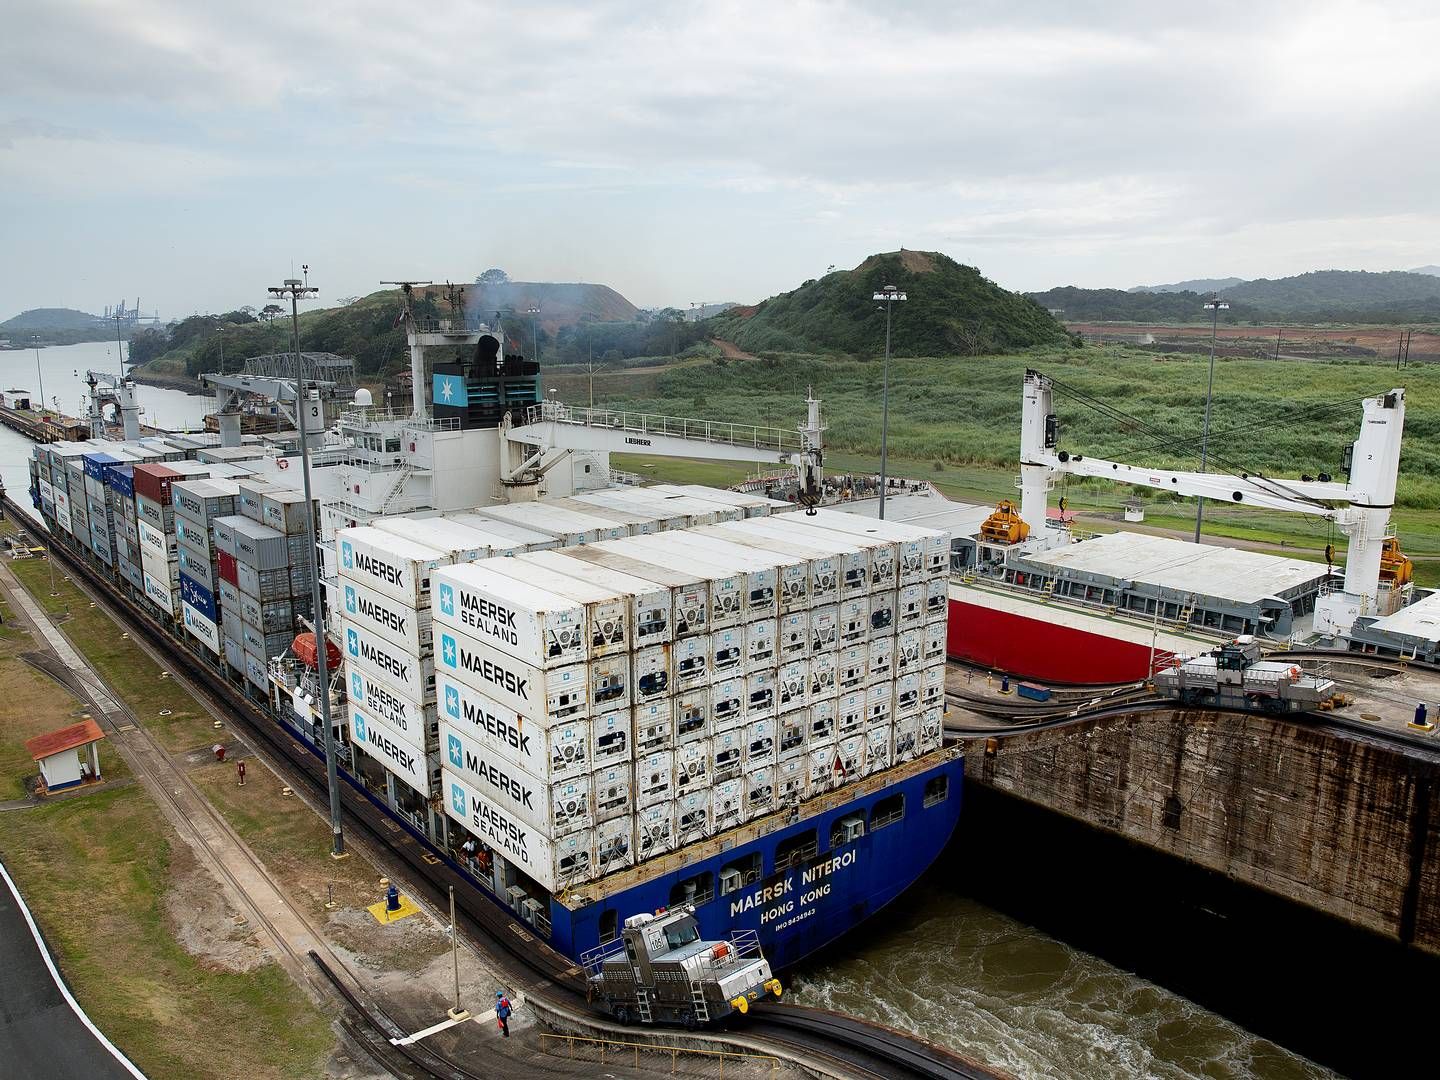 Unlike dry bulk carriers, container ships typically operate on fixed schedules, making it easier for them to book transit times through the Panama Canal. As a result, many dry bulk operators have chosen to reroute their vessels, according to Bimco's analysis.